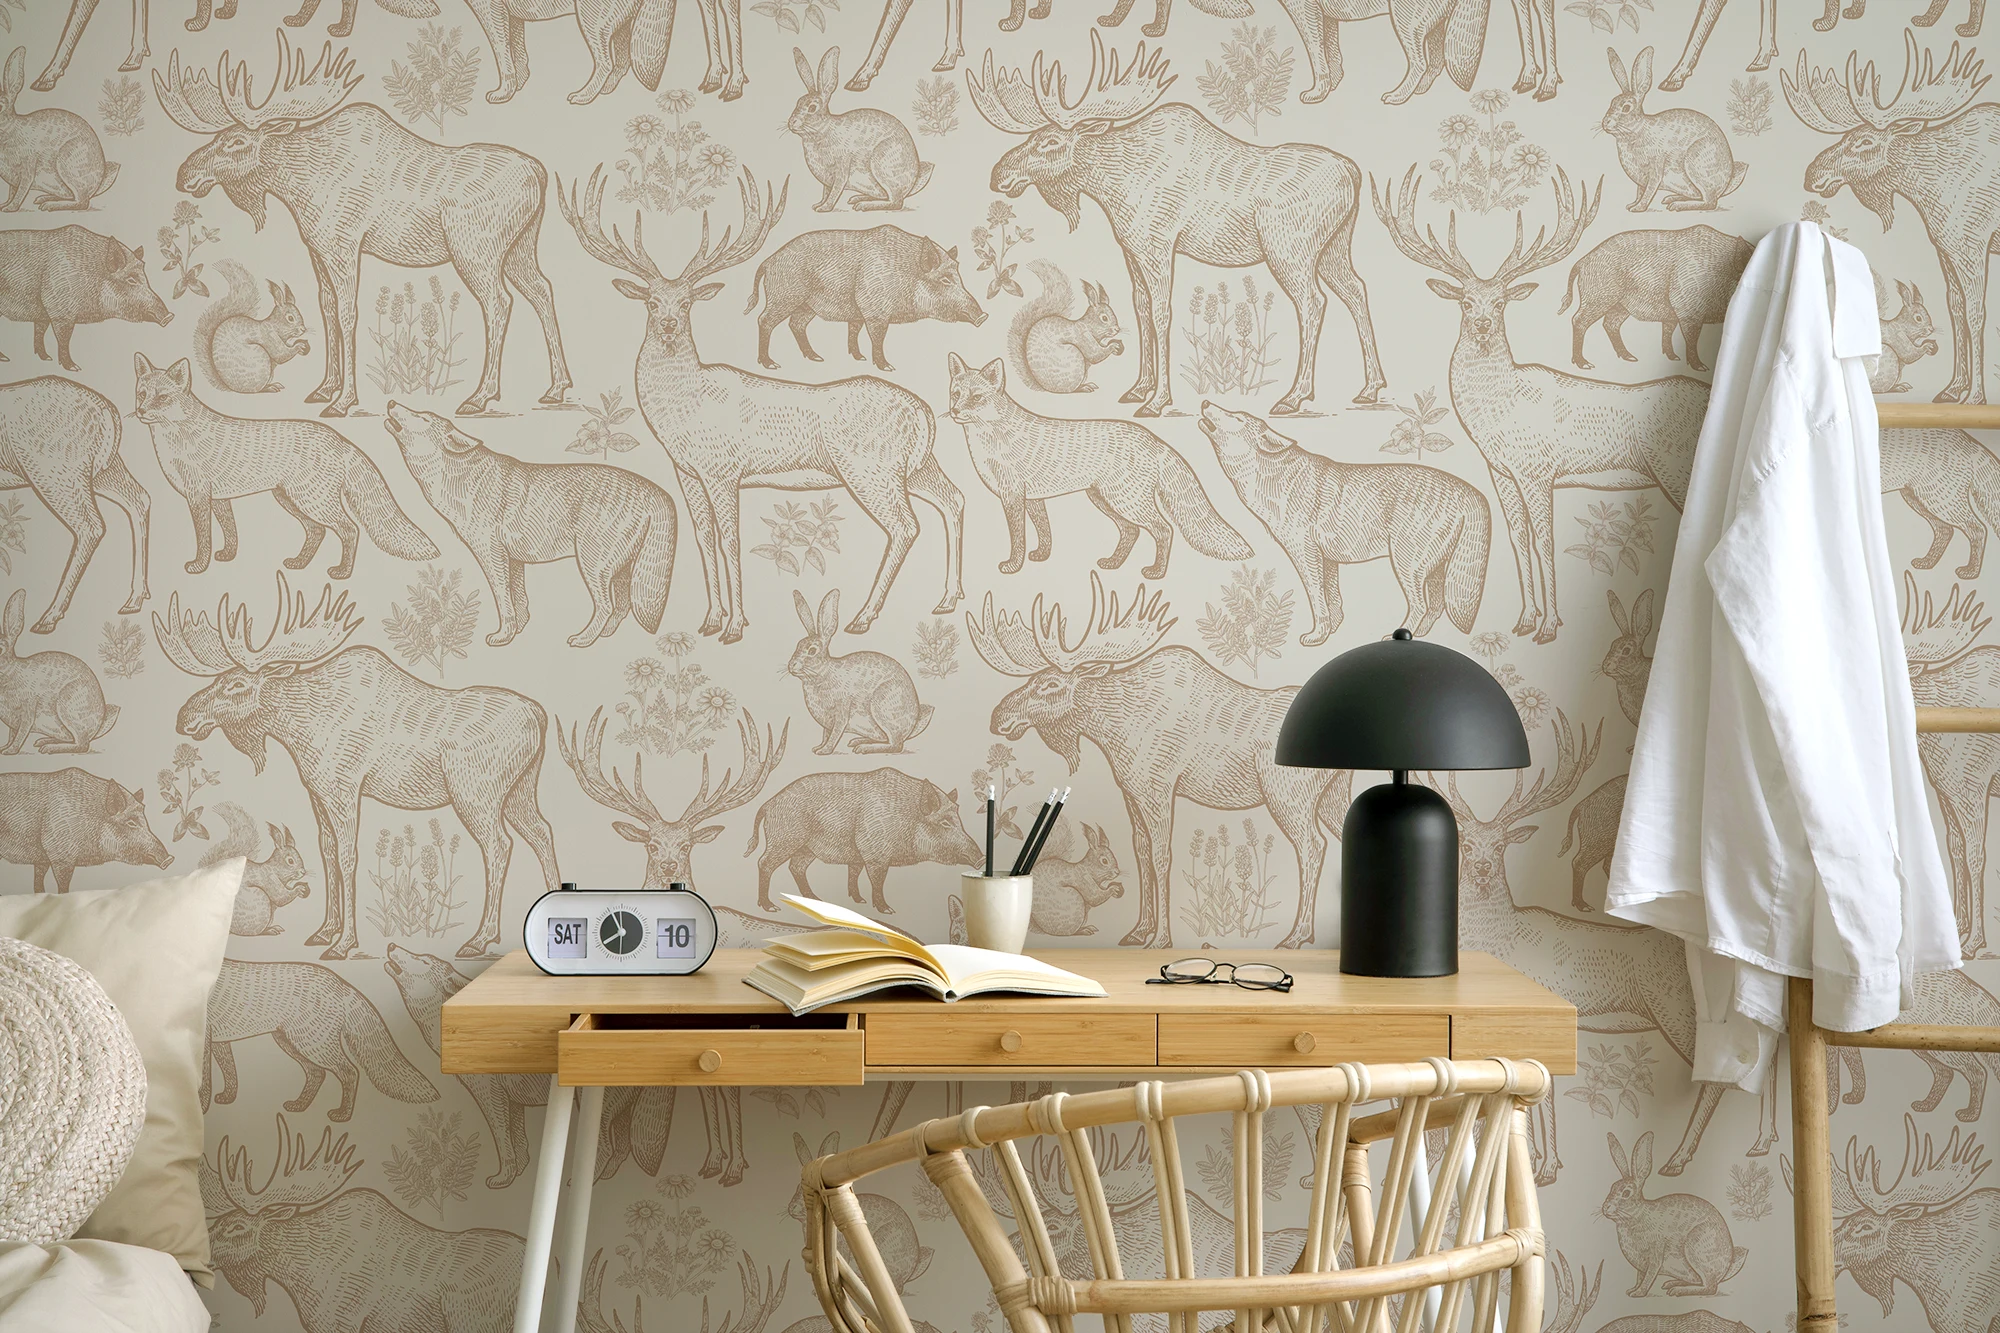 interior-design-inspiration-traditional-style-wallpaper-wall-gravure-animals-vintage